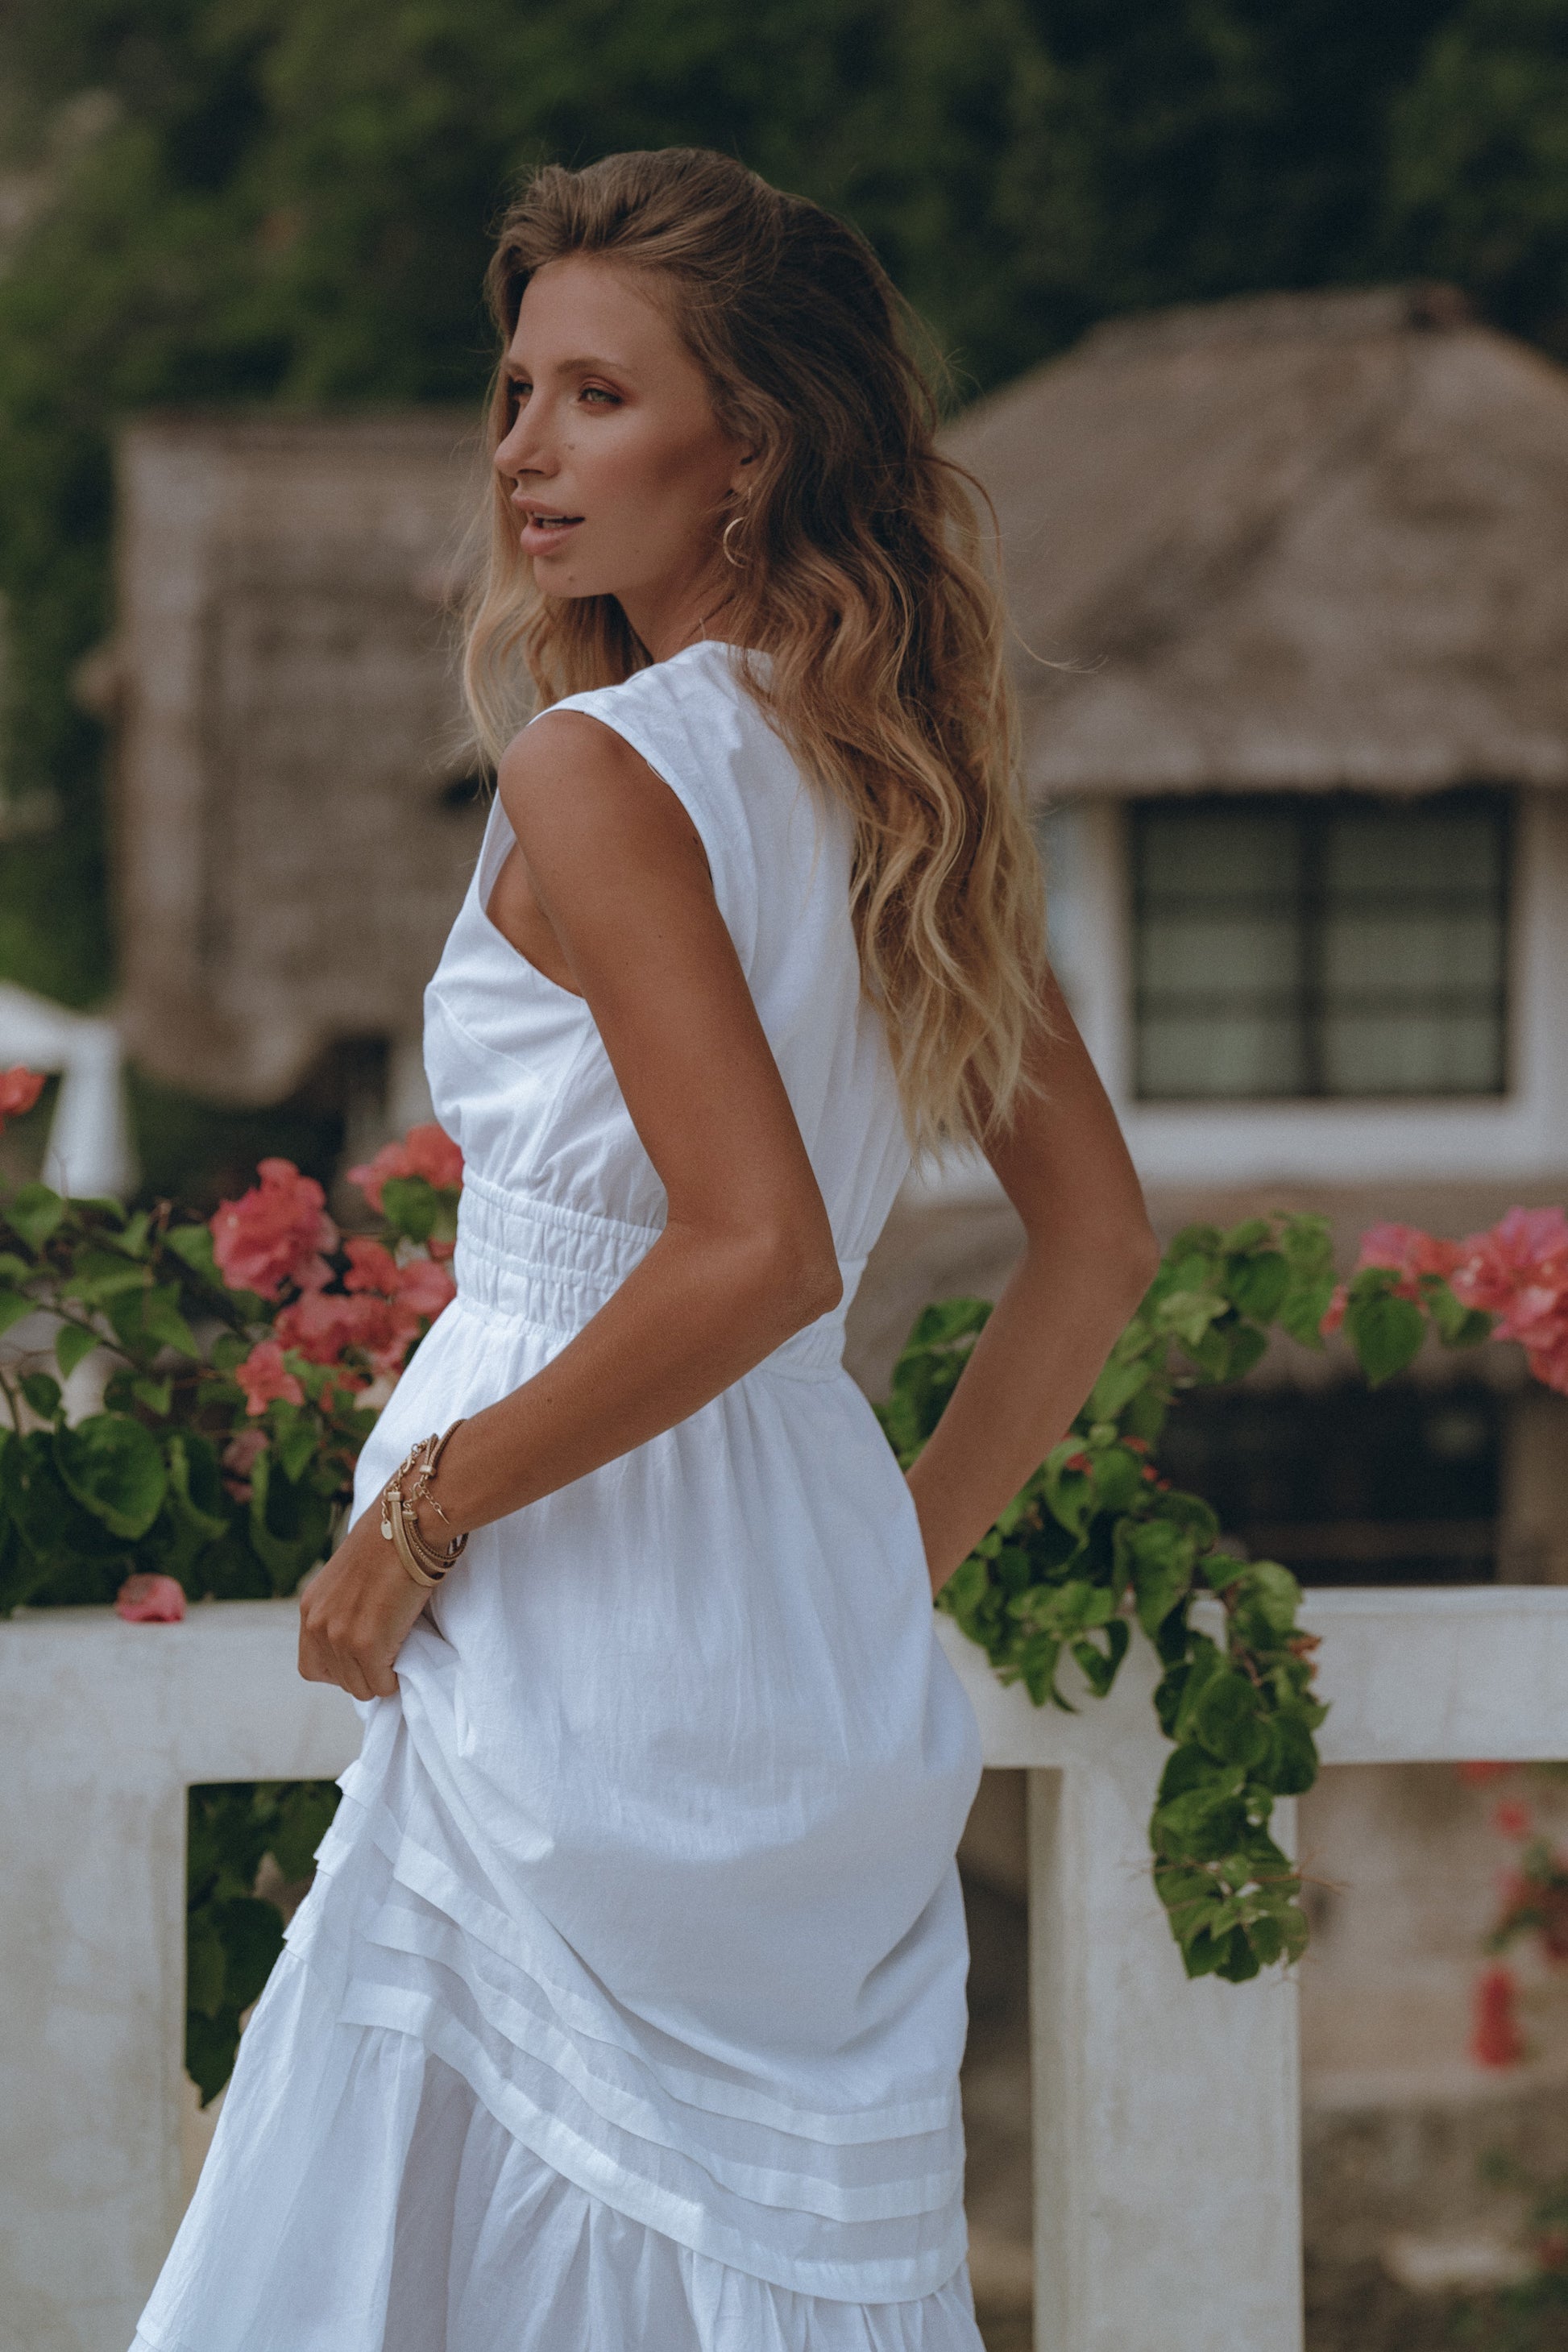 A model wore a long white dress walking on roof 